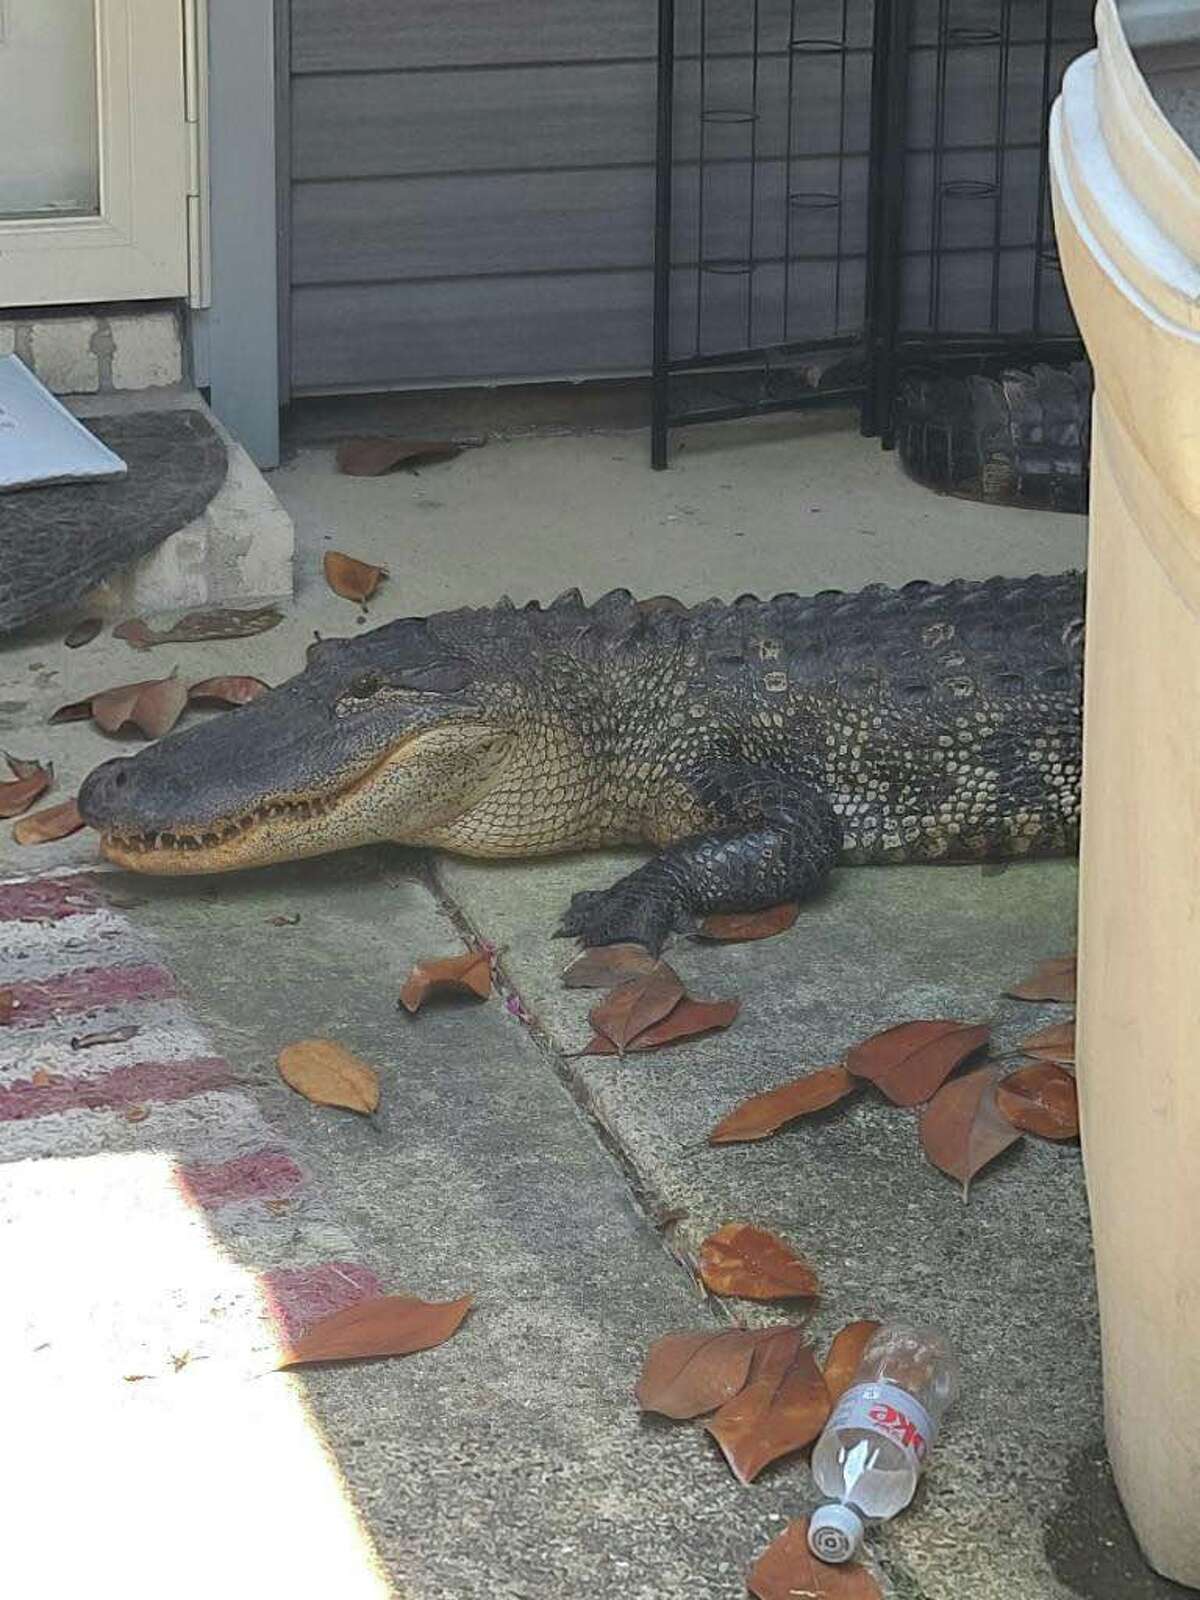 A Texas woman was slapped by the tail of an 8-foot alligator found on her front porch after she returned from a trip out of town on Monday, May 2 in Humble, which is in the Houston area.